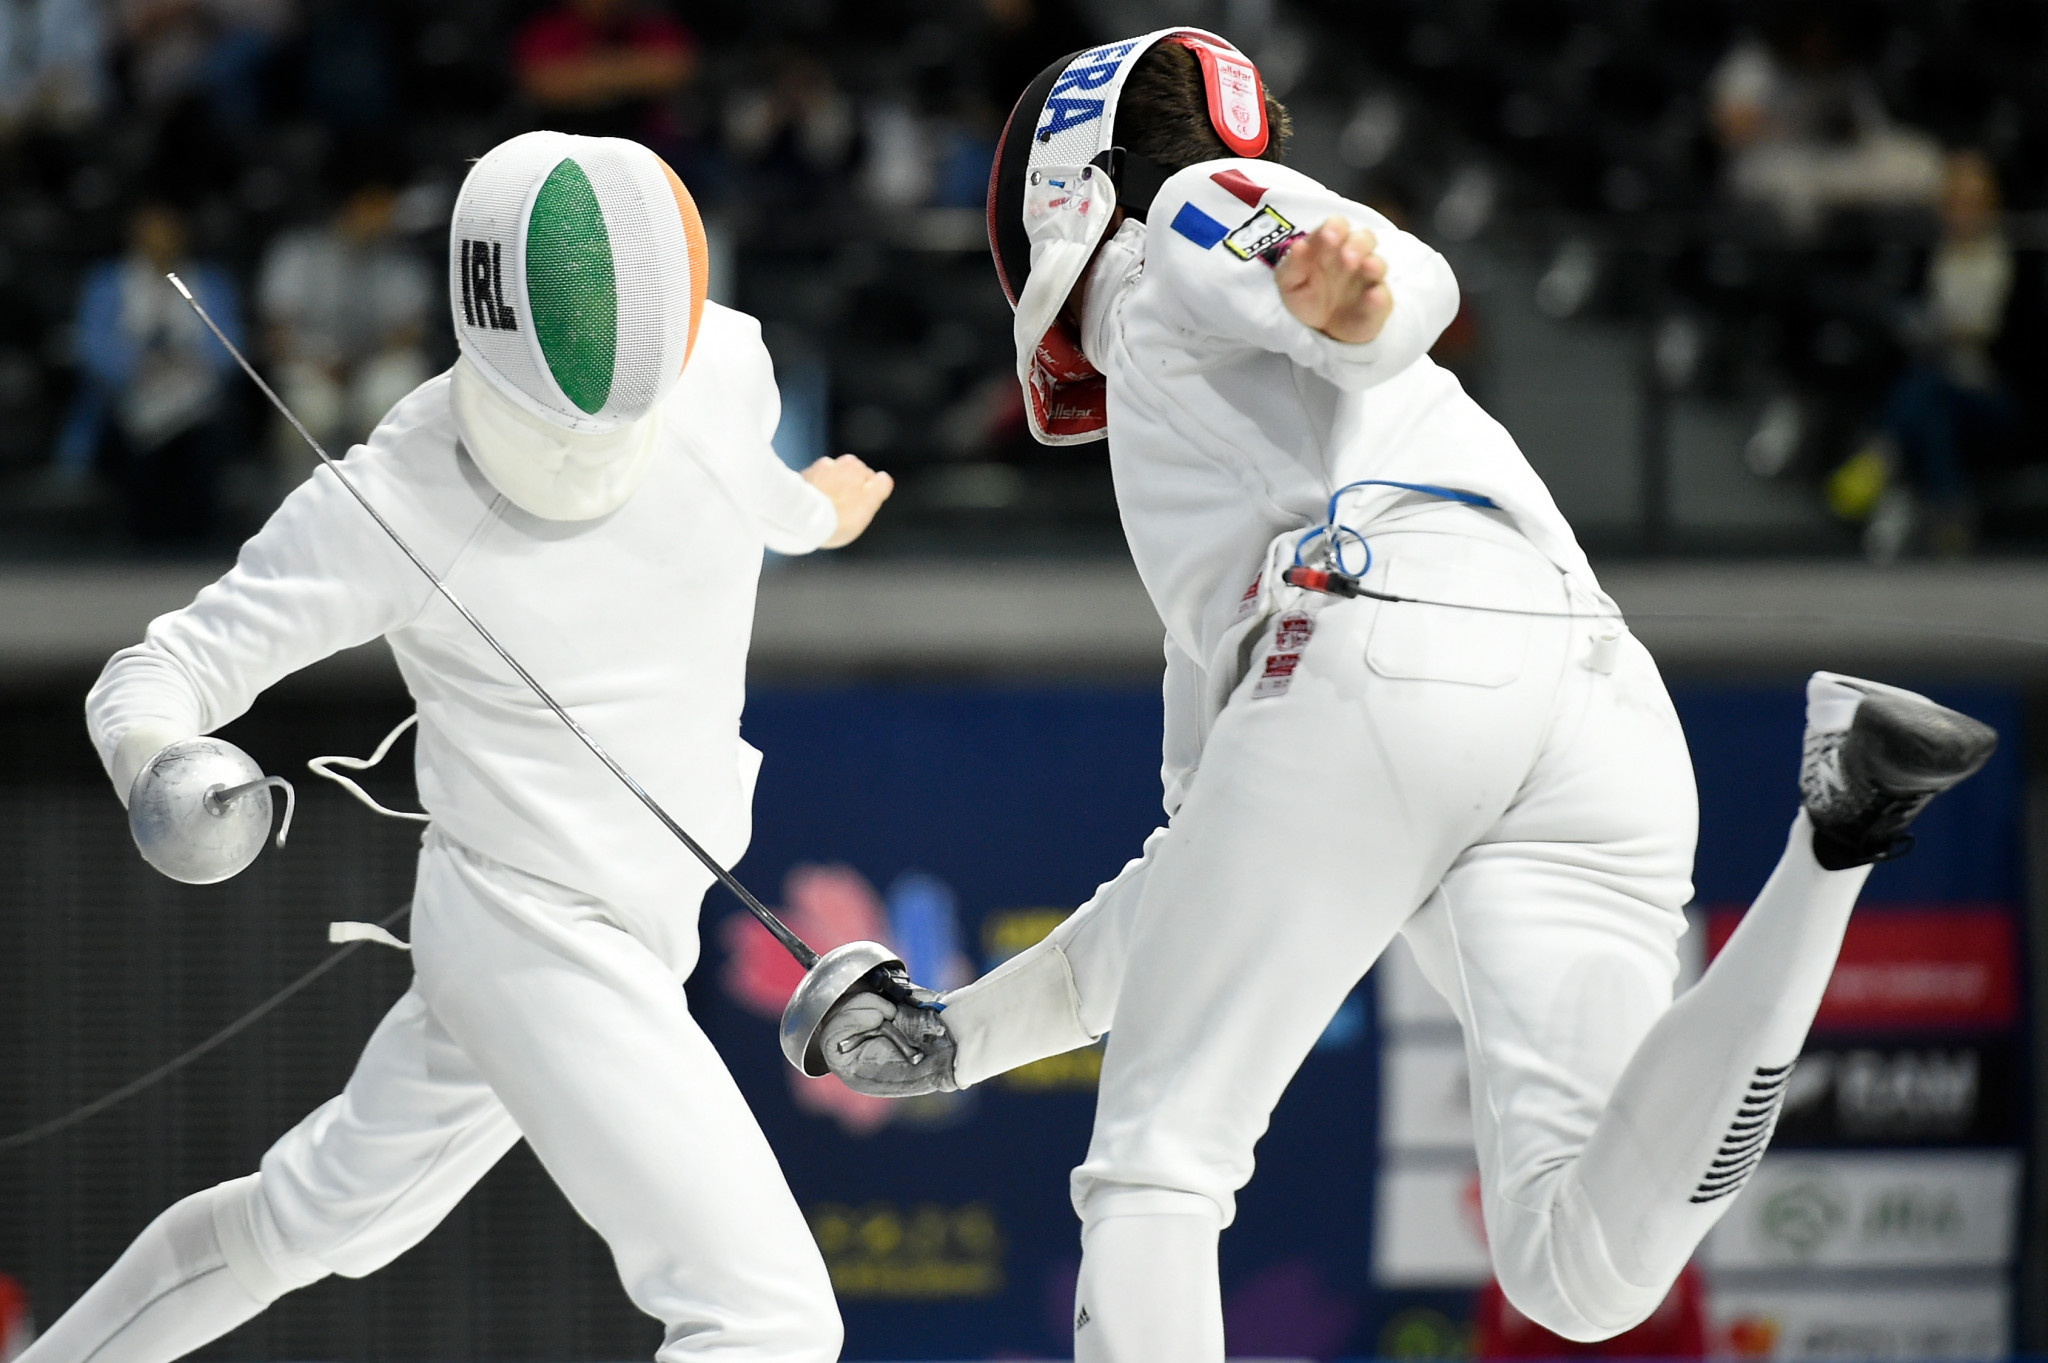 New Olympic modern pentathlon champions to be crowned at Tokyo 2020